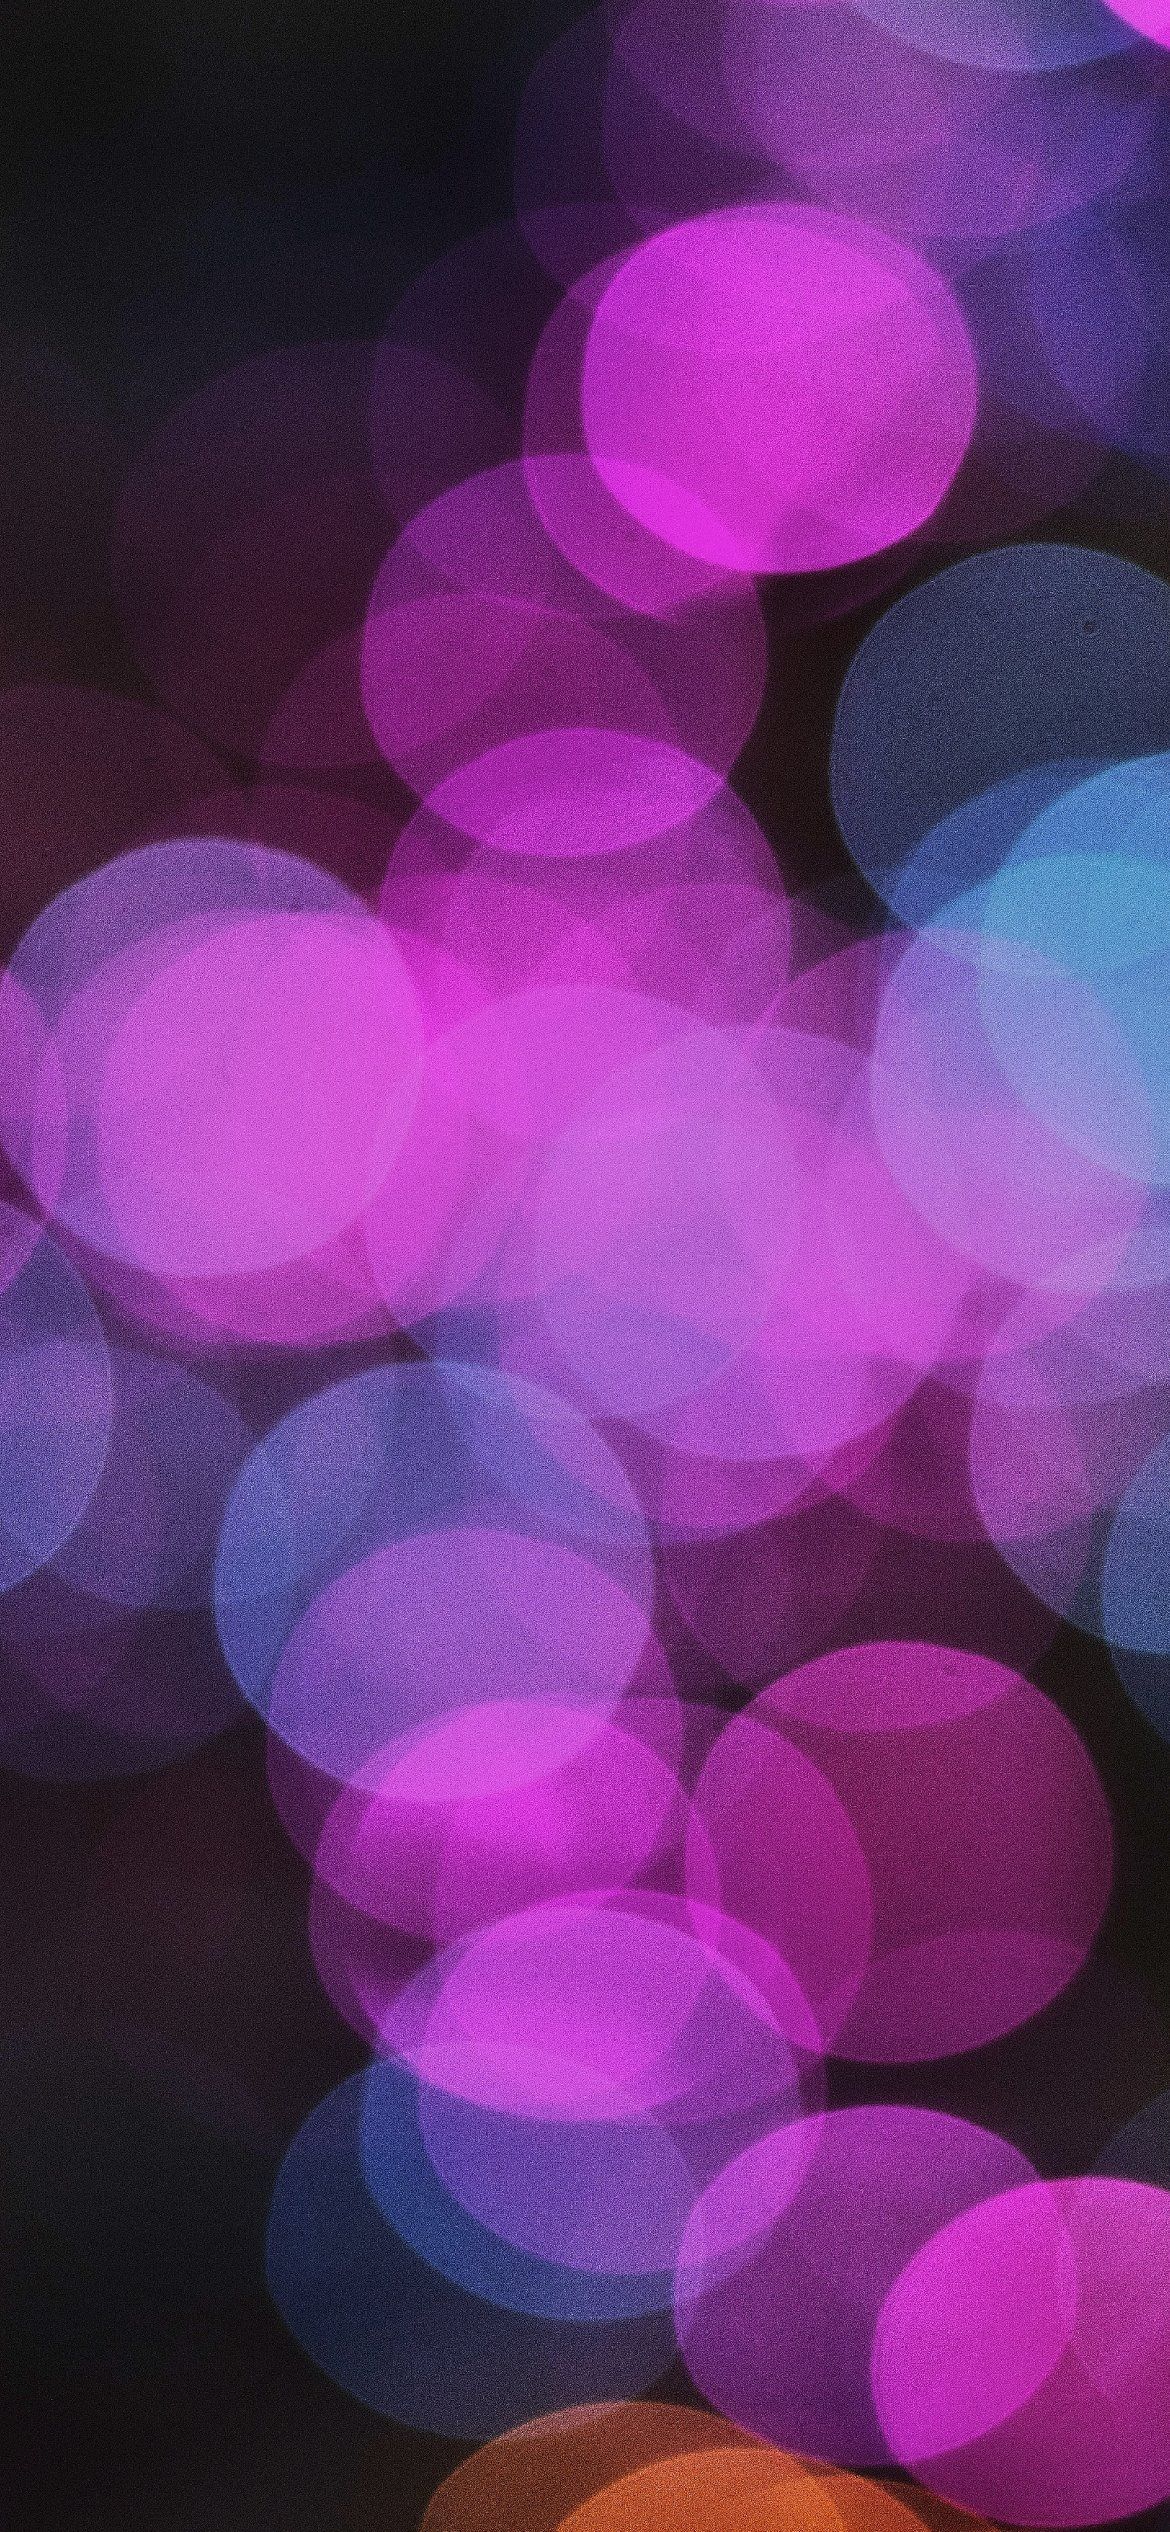 A wallpaper of purple, blue, and pink lights against a black background - Dark purple, pastel purple